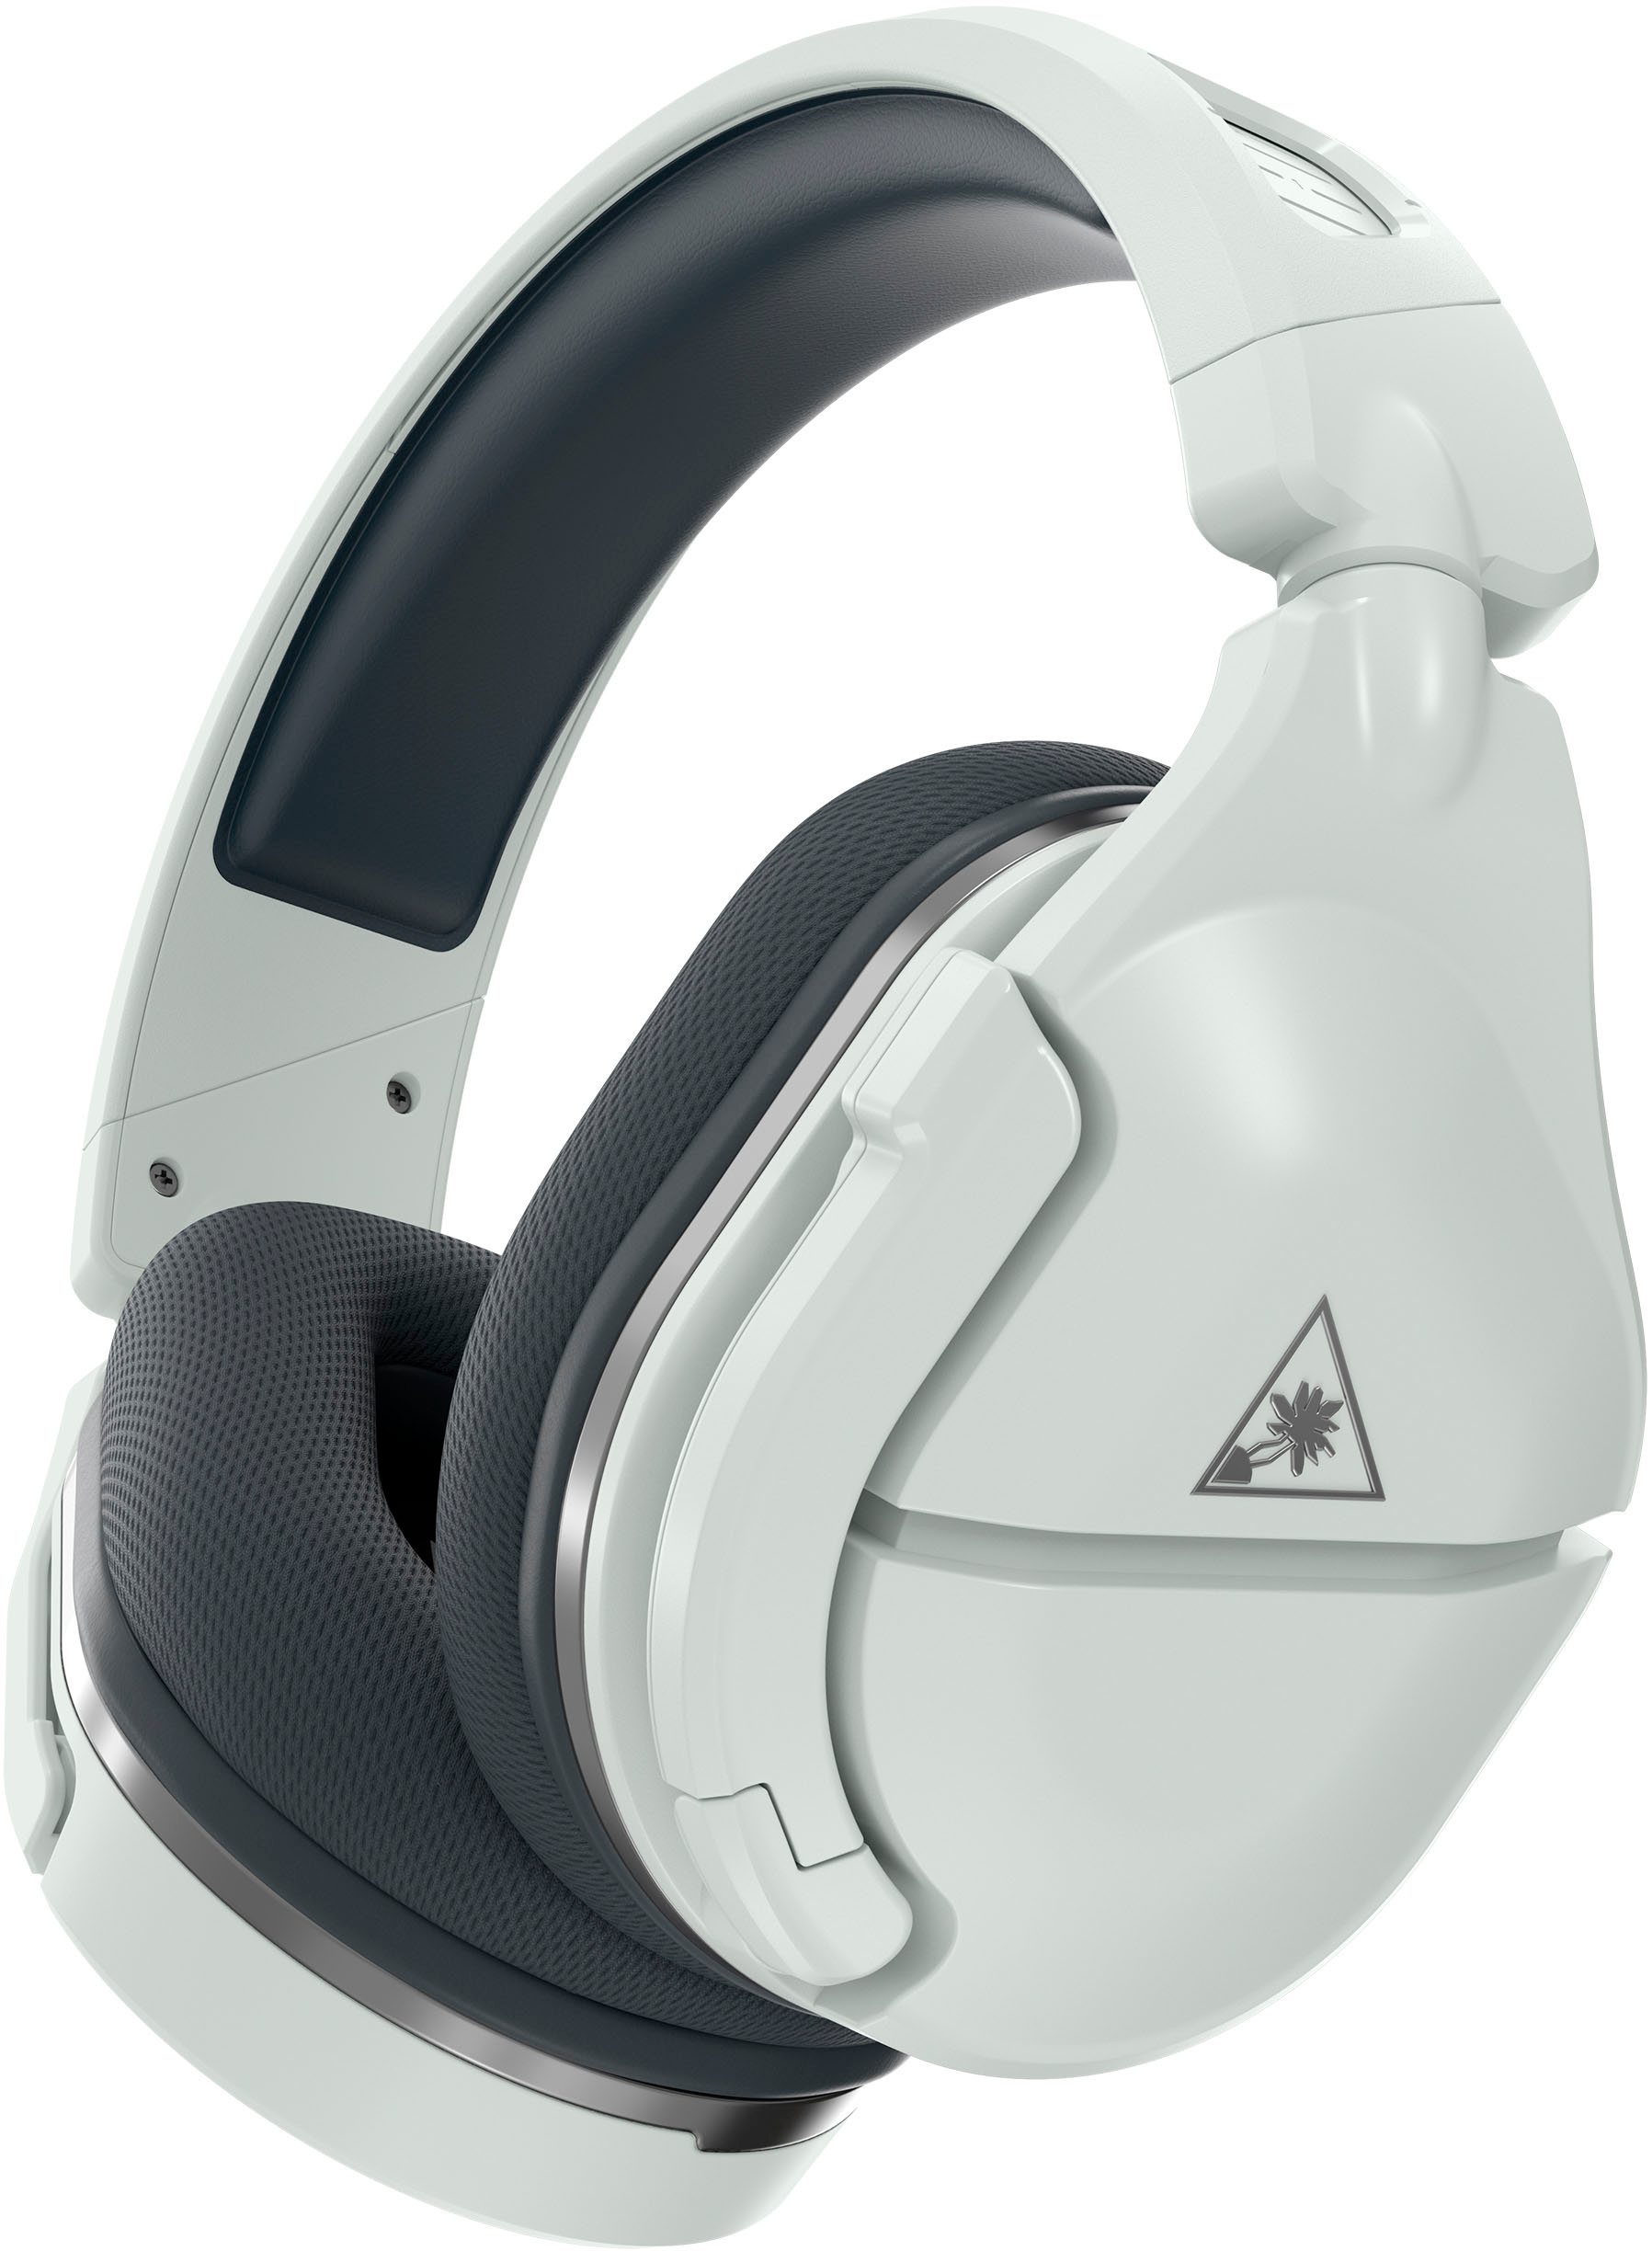 Angle View: Turtle Beach - Stealth 600 Gen 2 USB PS Wireless Gaming Headset for PS5, PS4 - White